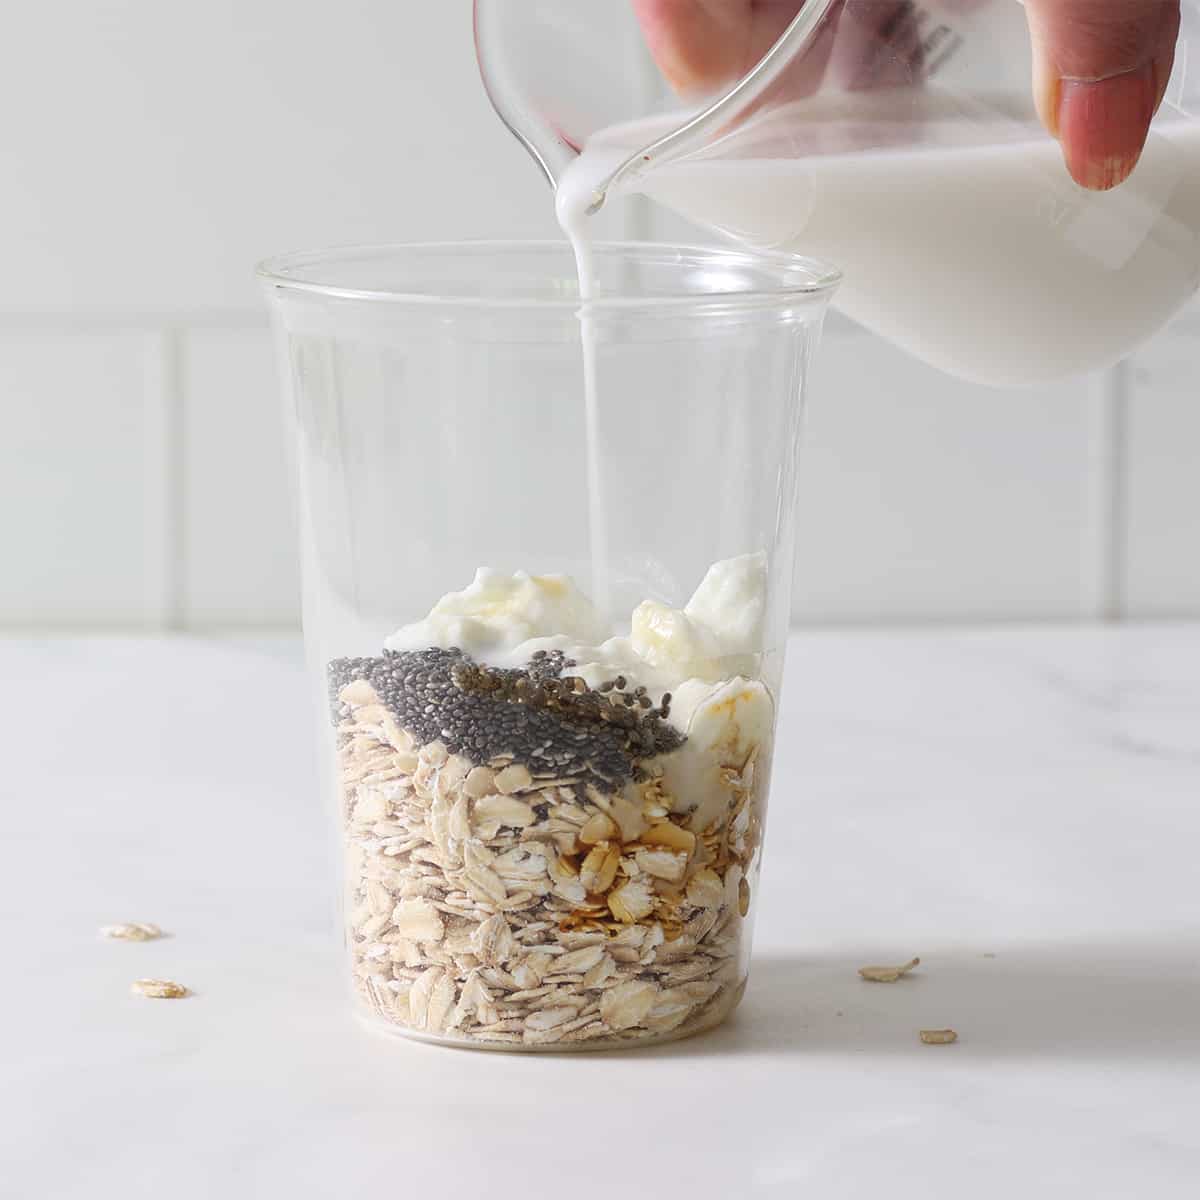 adding ingredients for overnight oats to a glass.